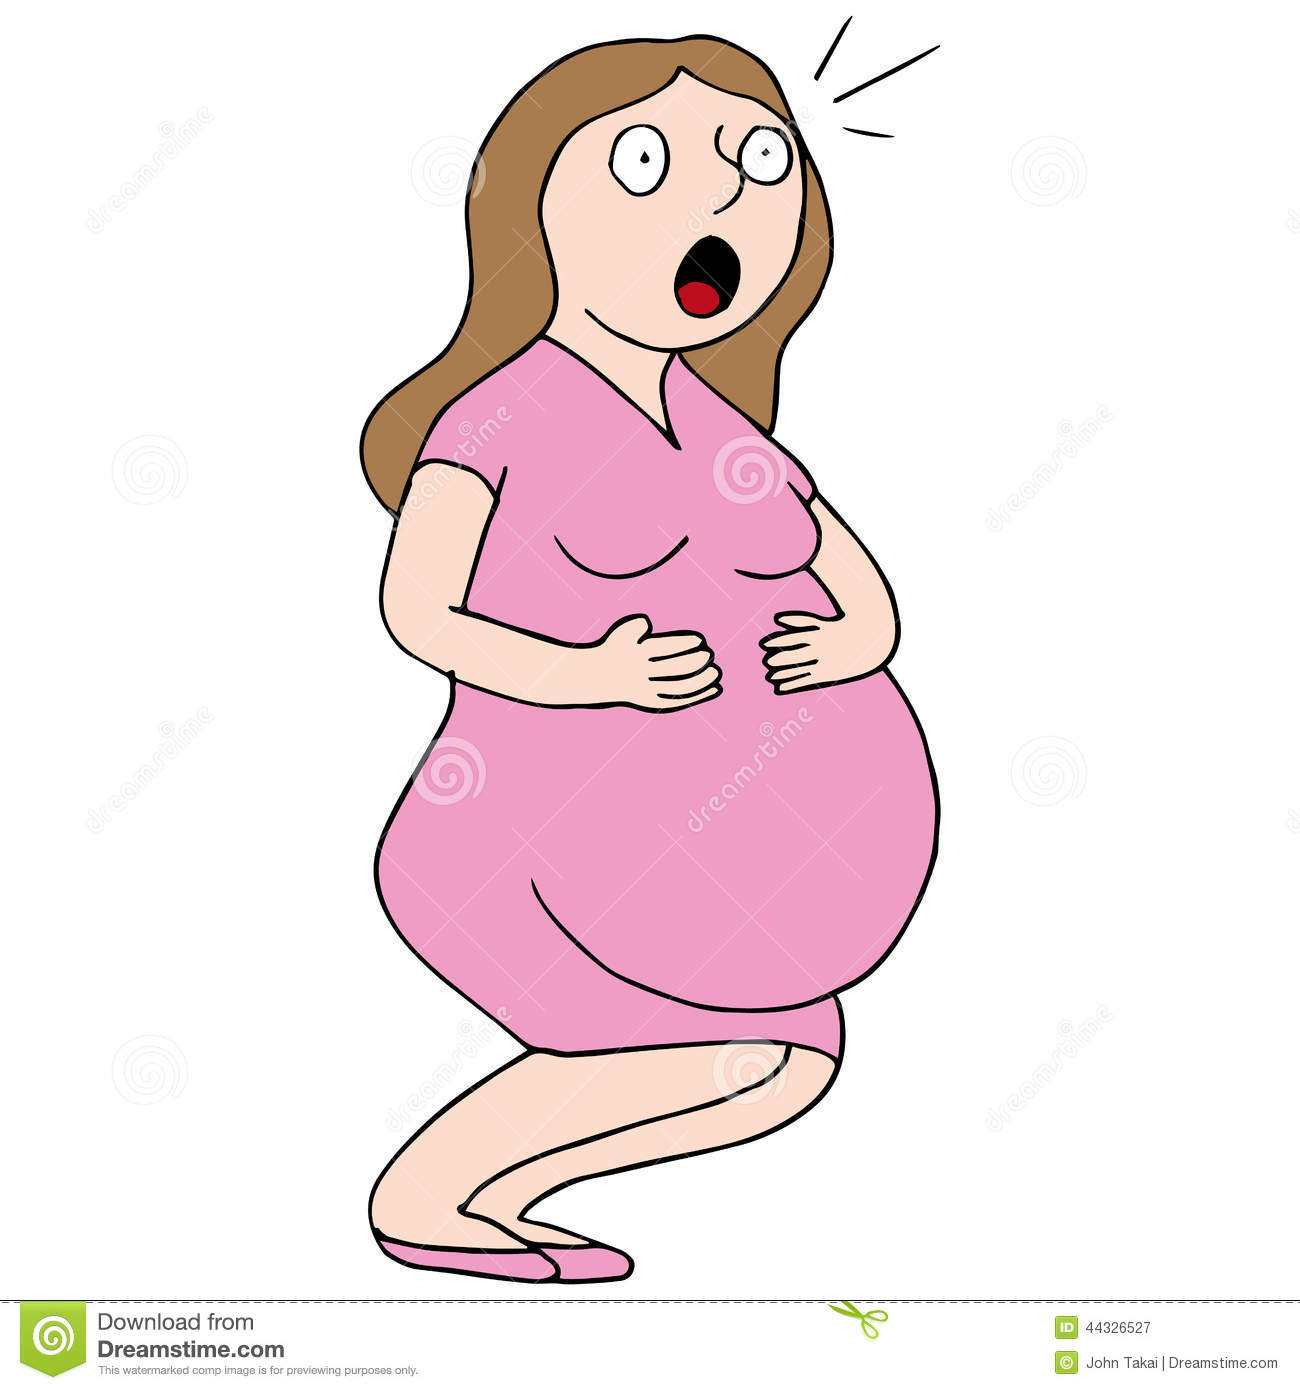 Labor Pains Stock Vector   Image  44326527